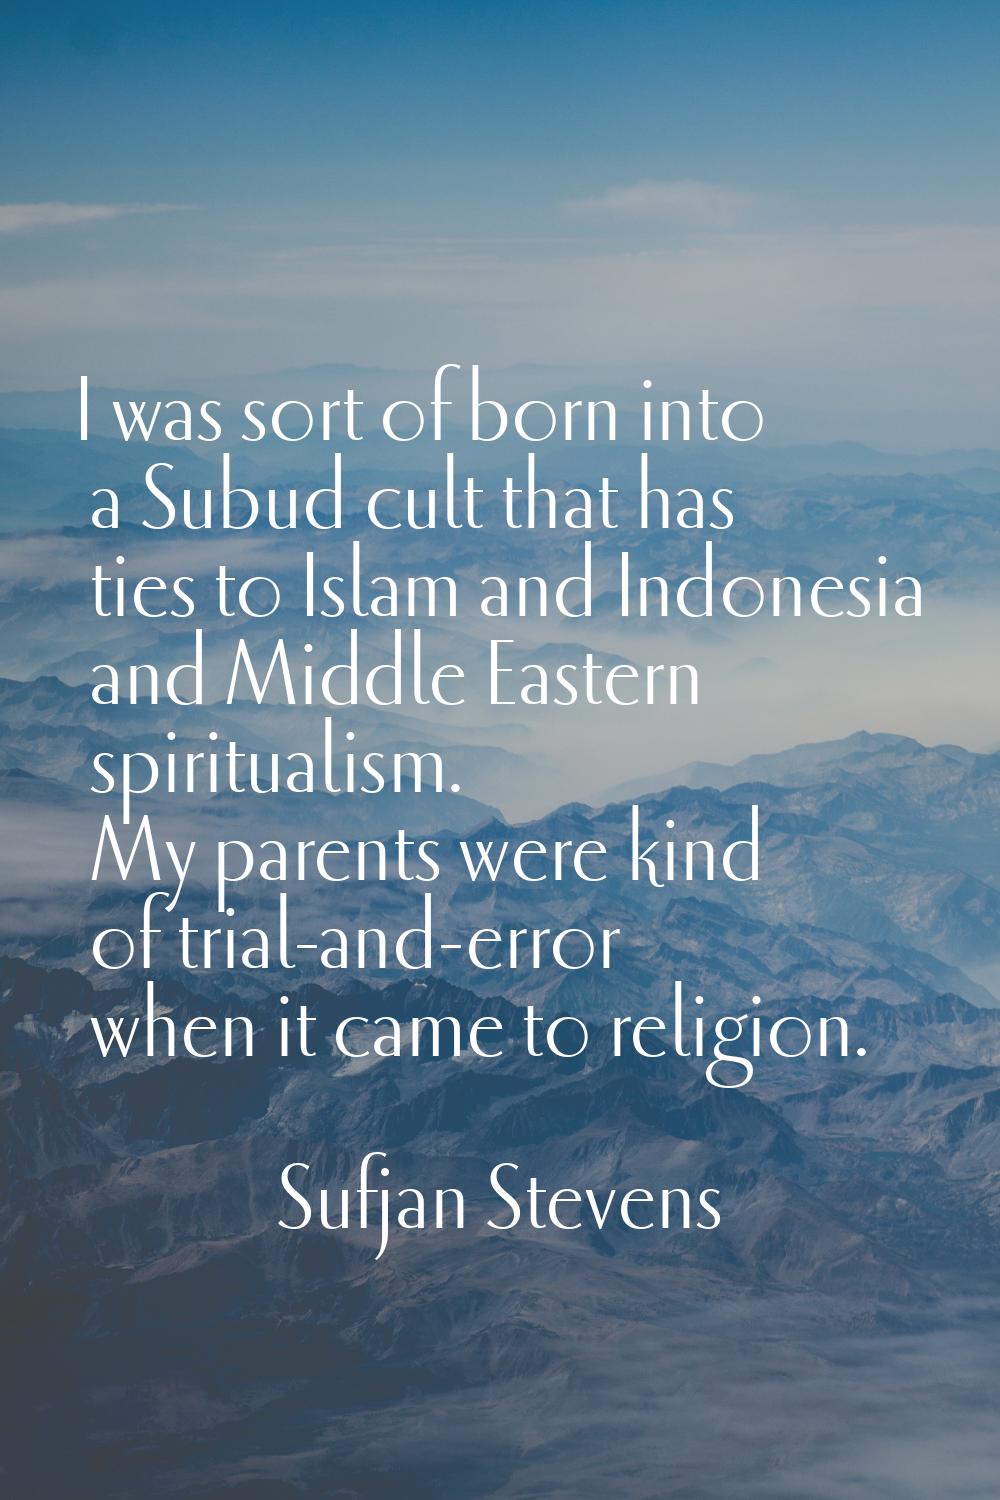 I was sort of born into a Subud cult that has ties to Islam and Indonesia and Middle Eastern spirit